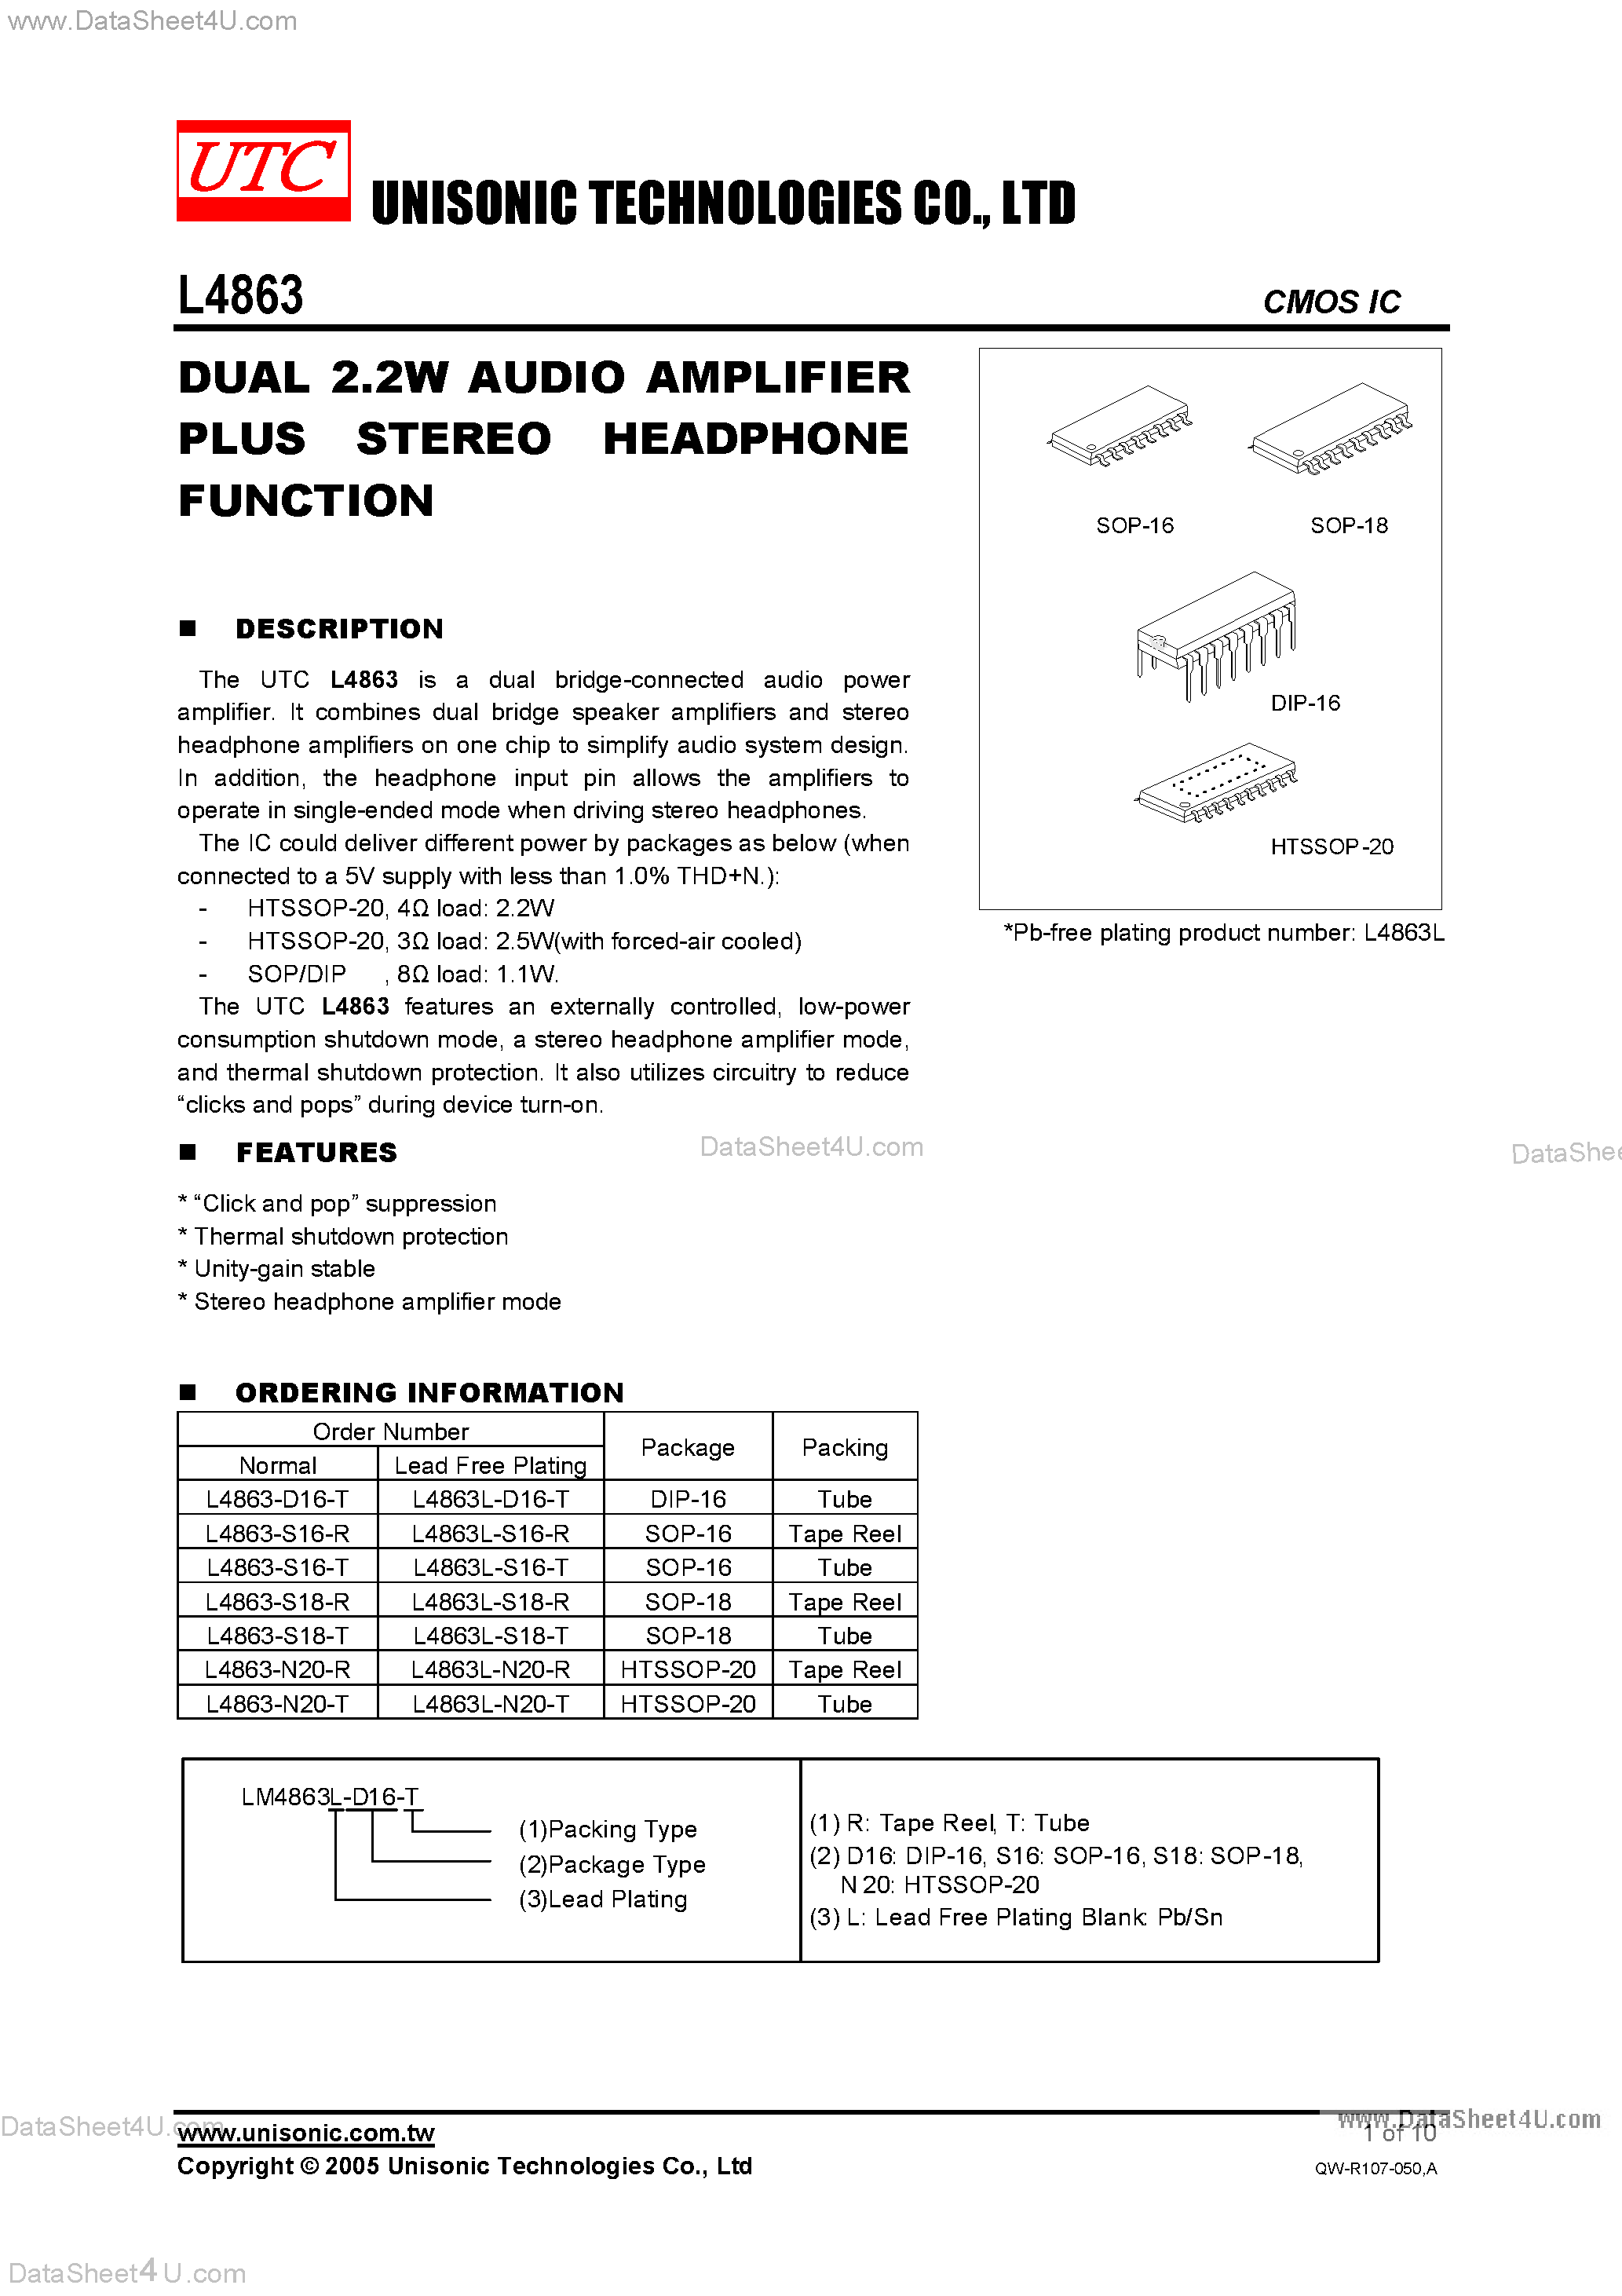 Datasheet L-4863 - Dual 2.2W Audio Amplifier Plus Stereo Headphone Function page 1